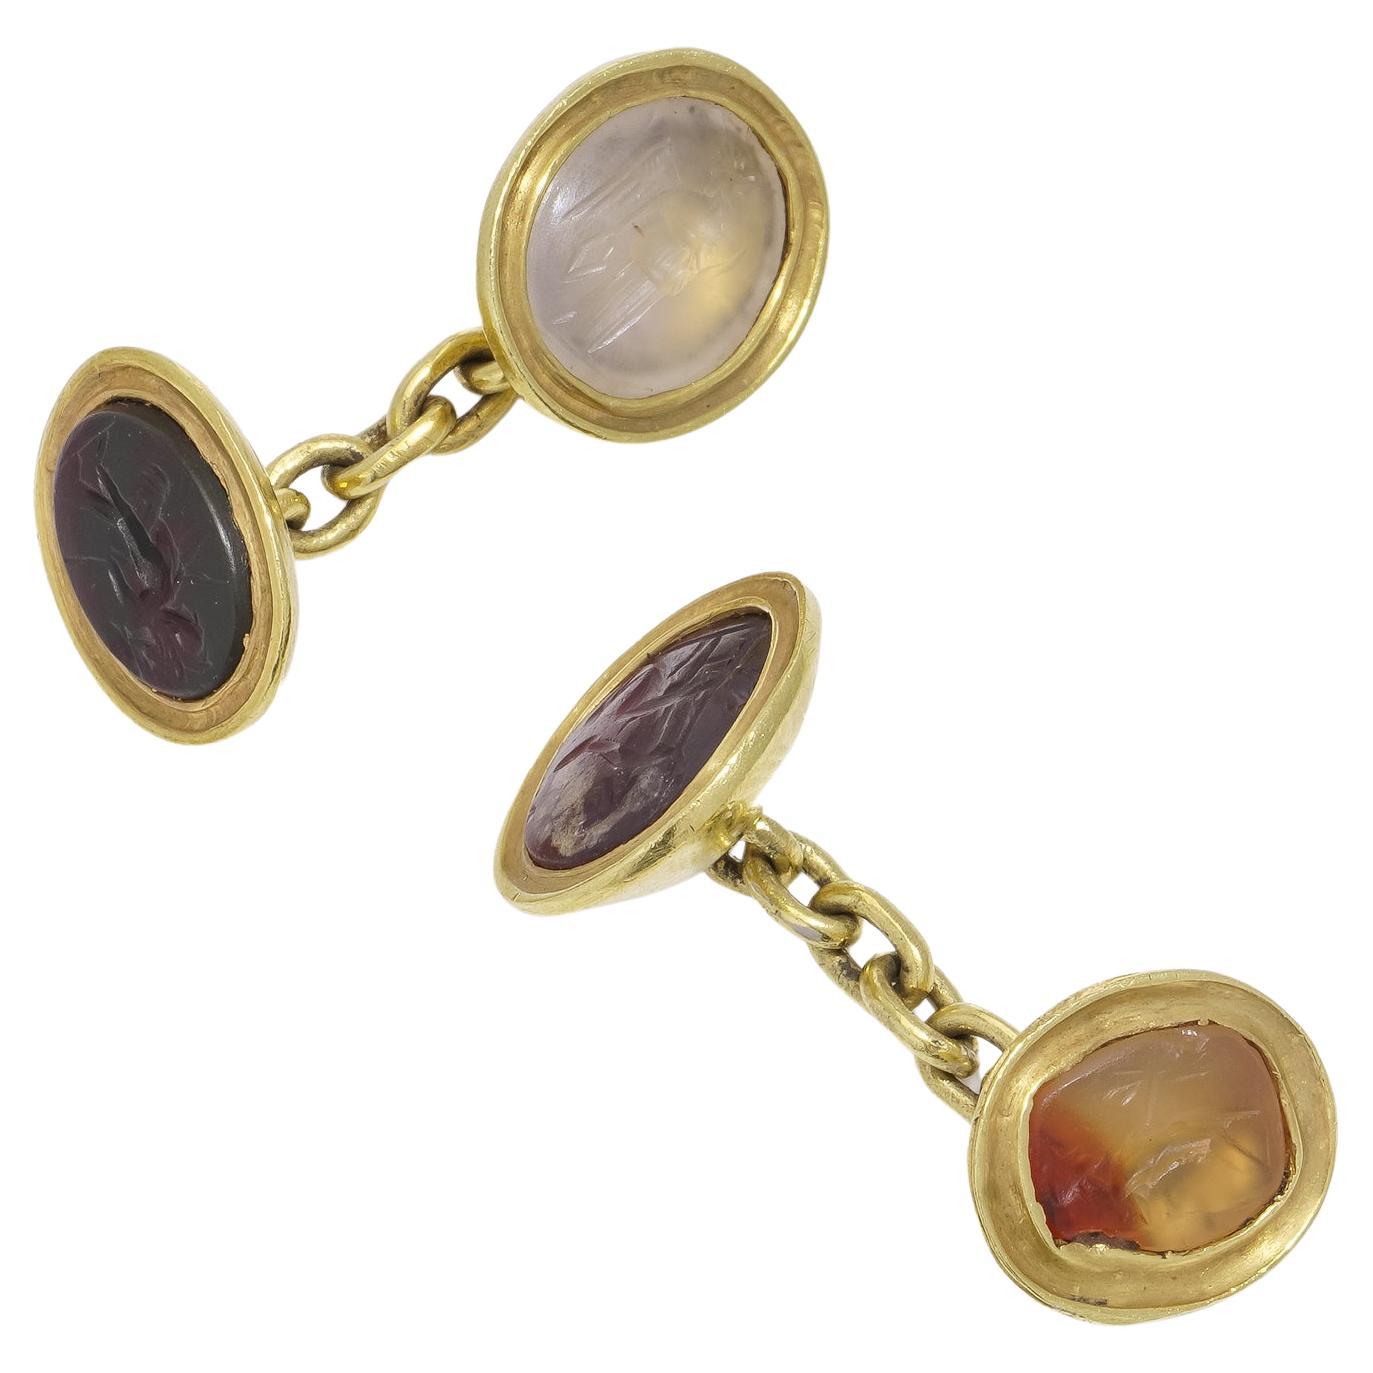 Antique 22kt yellow gold cufflinks, each adorned with Roman 4 carved hardstone